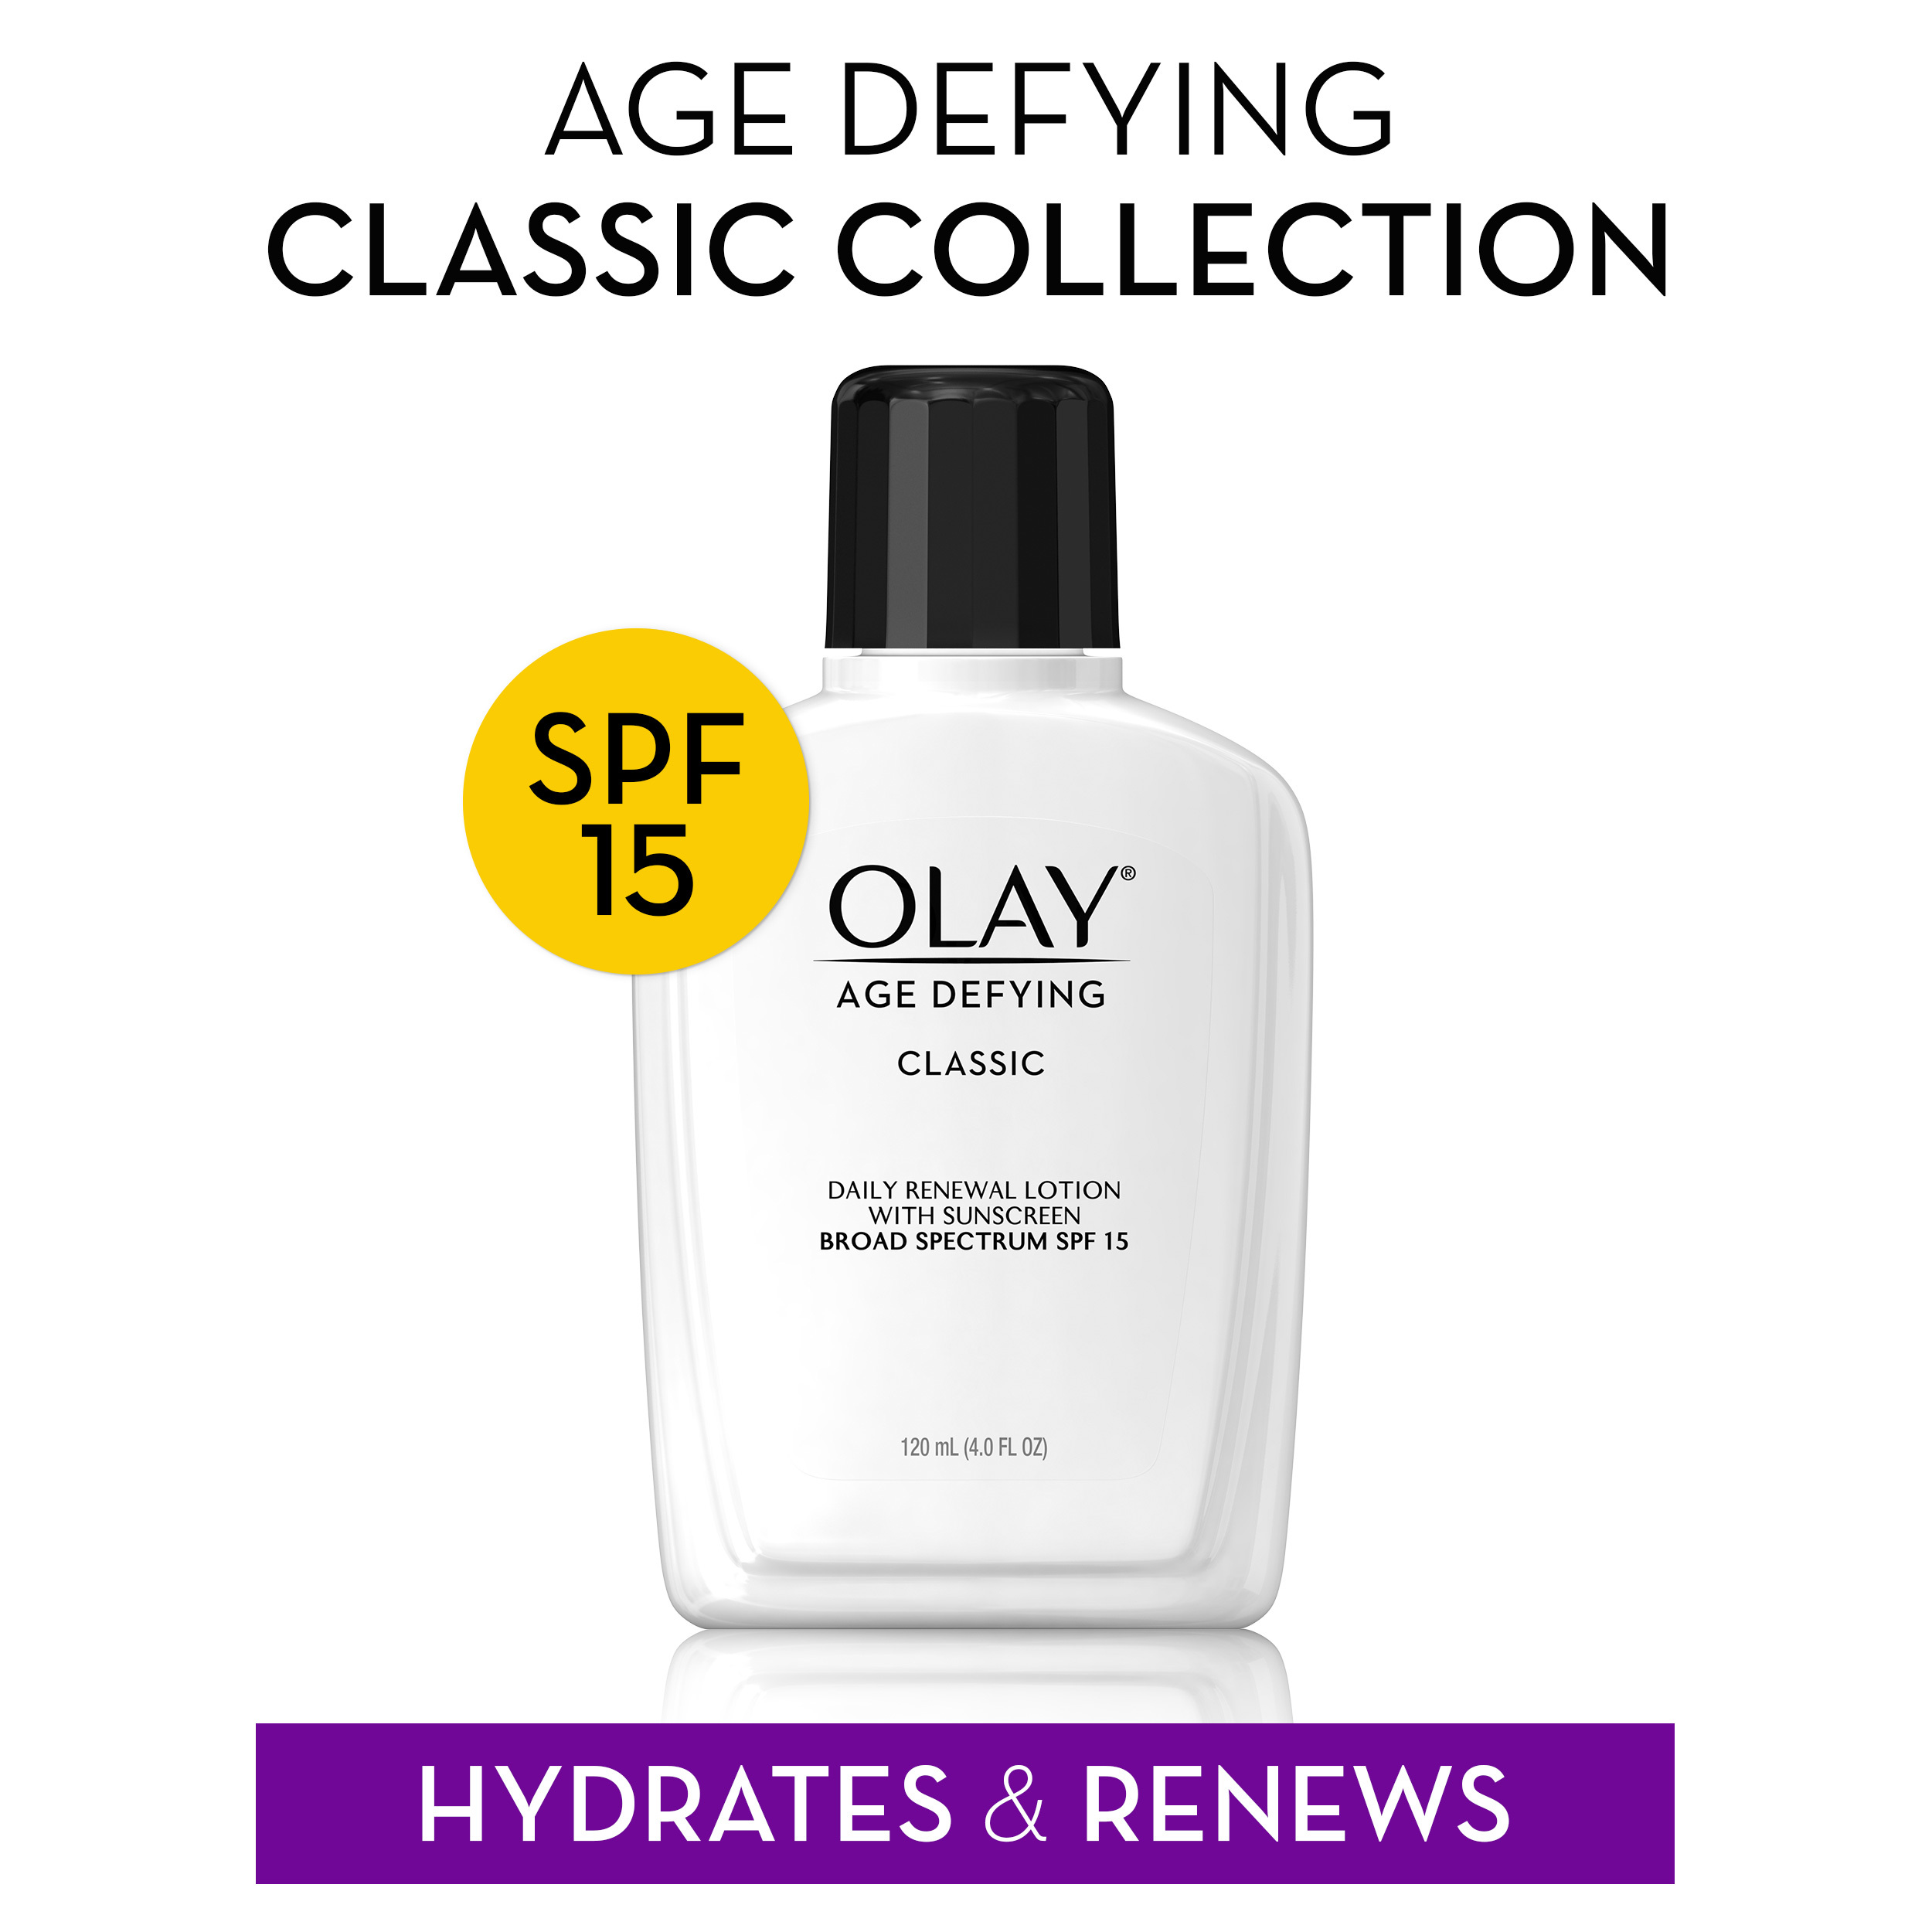 Olay Age Defying Classic Daily Renewal Lotion, Fights Fine Lines & Wrinkles, Normal Skin, SPF 15, 4 fl oz - image 7 of 10